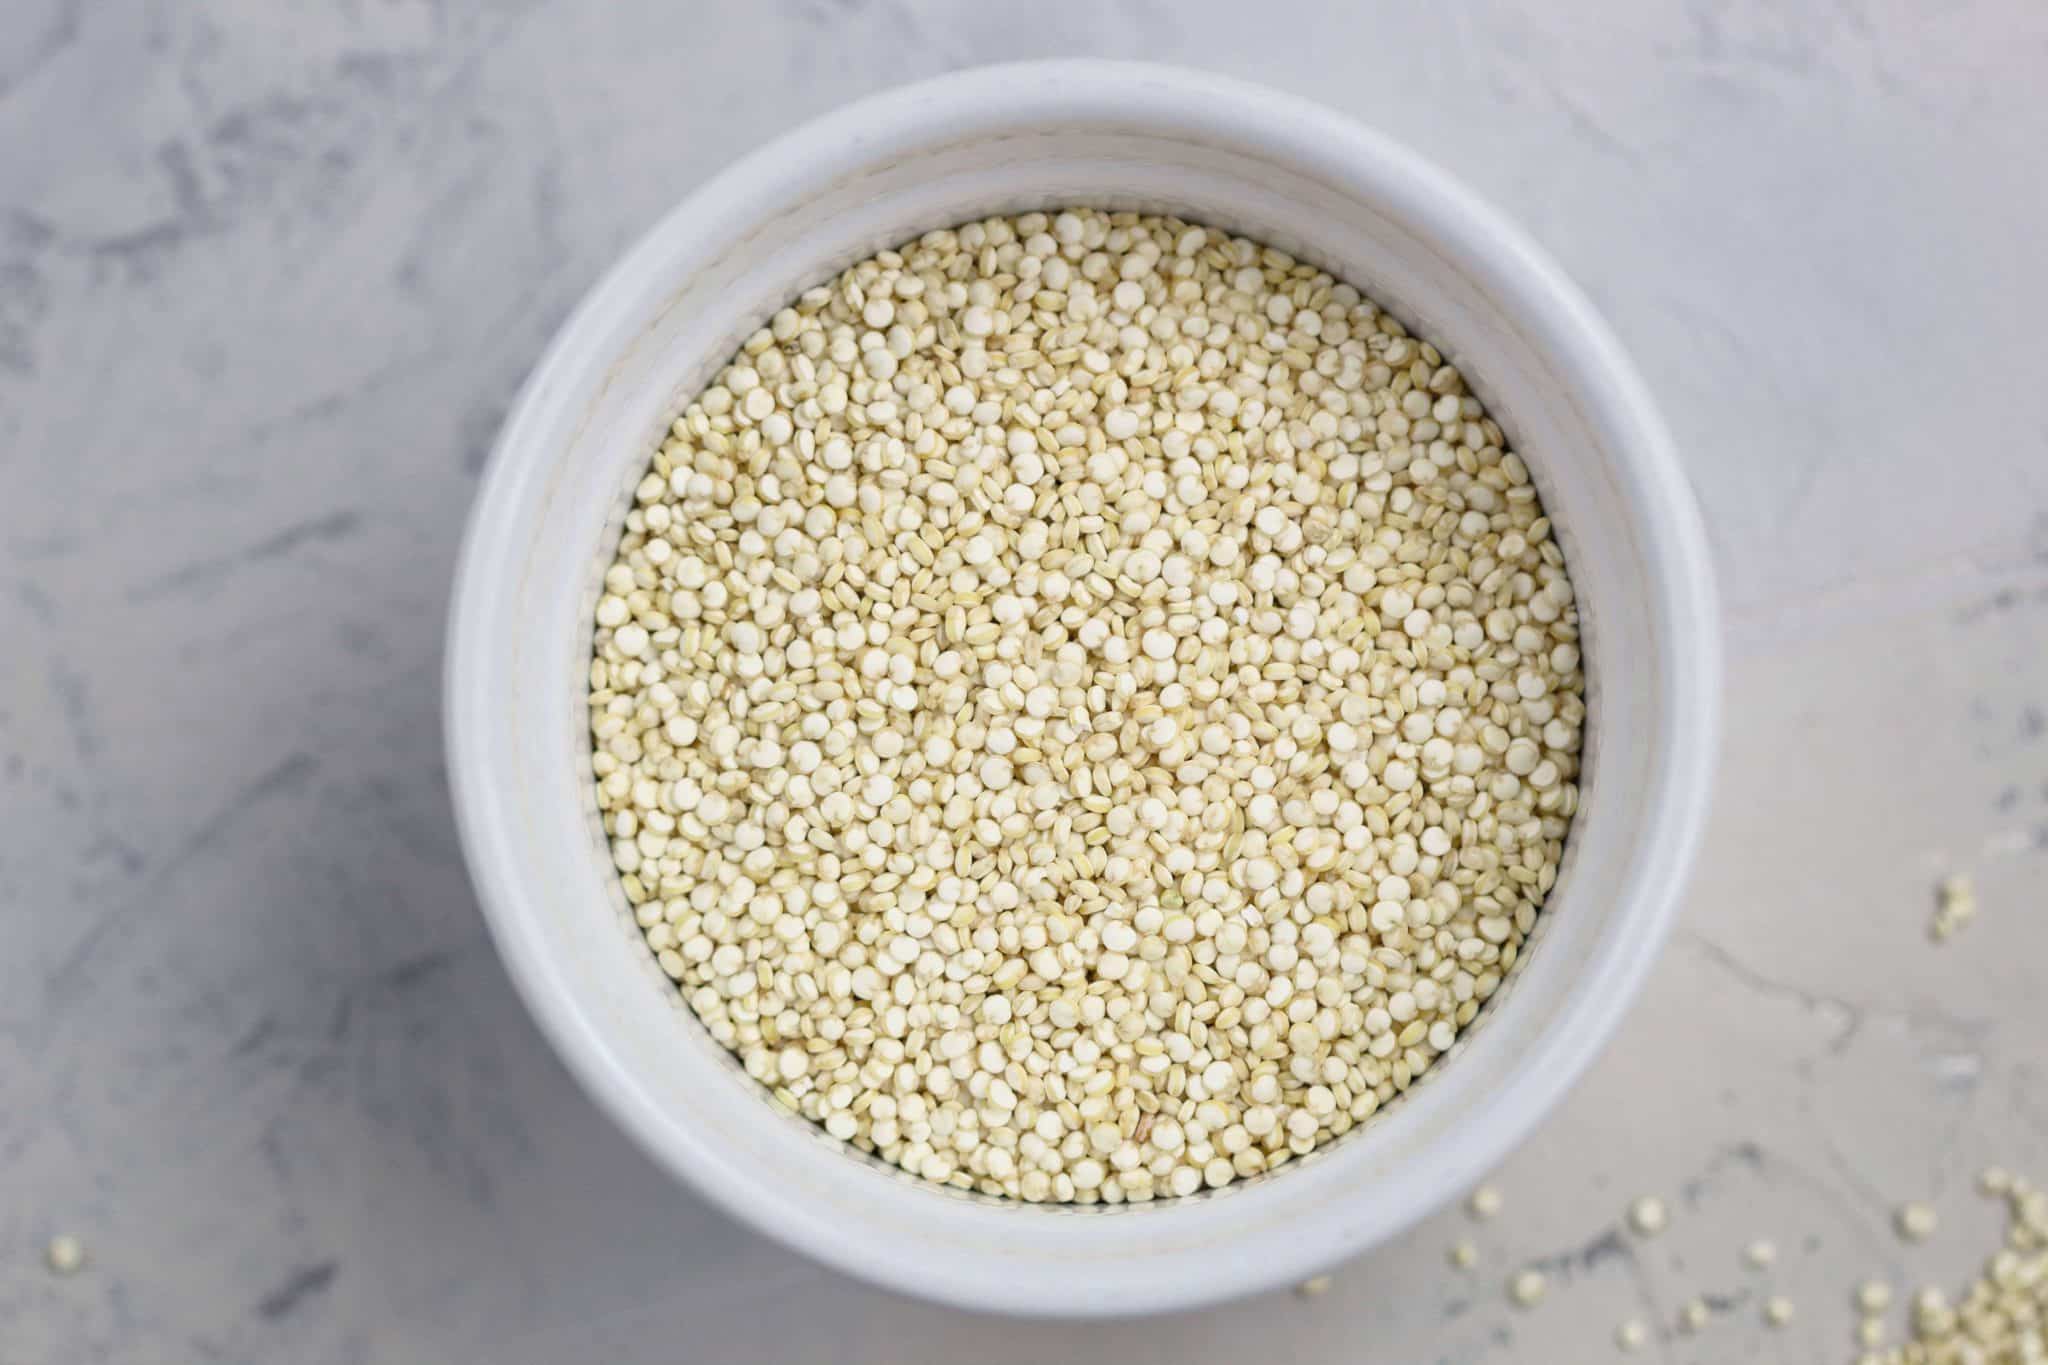 How to cook quinoa? All you need to know about quinoa.